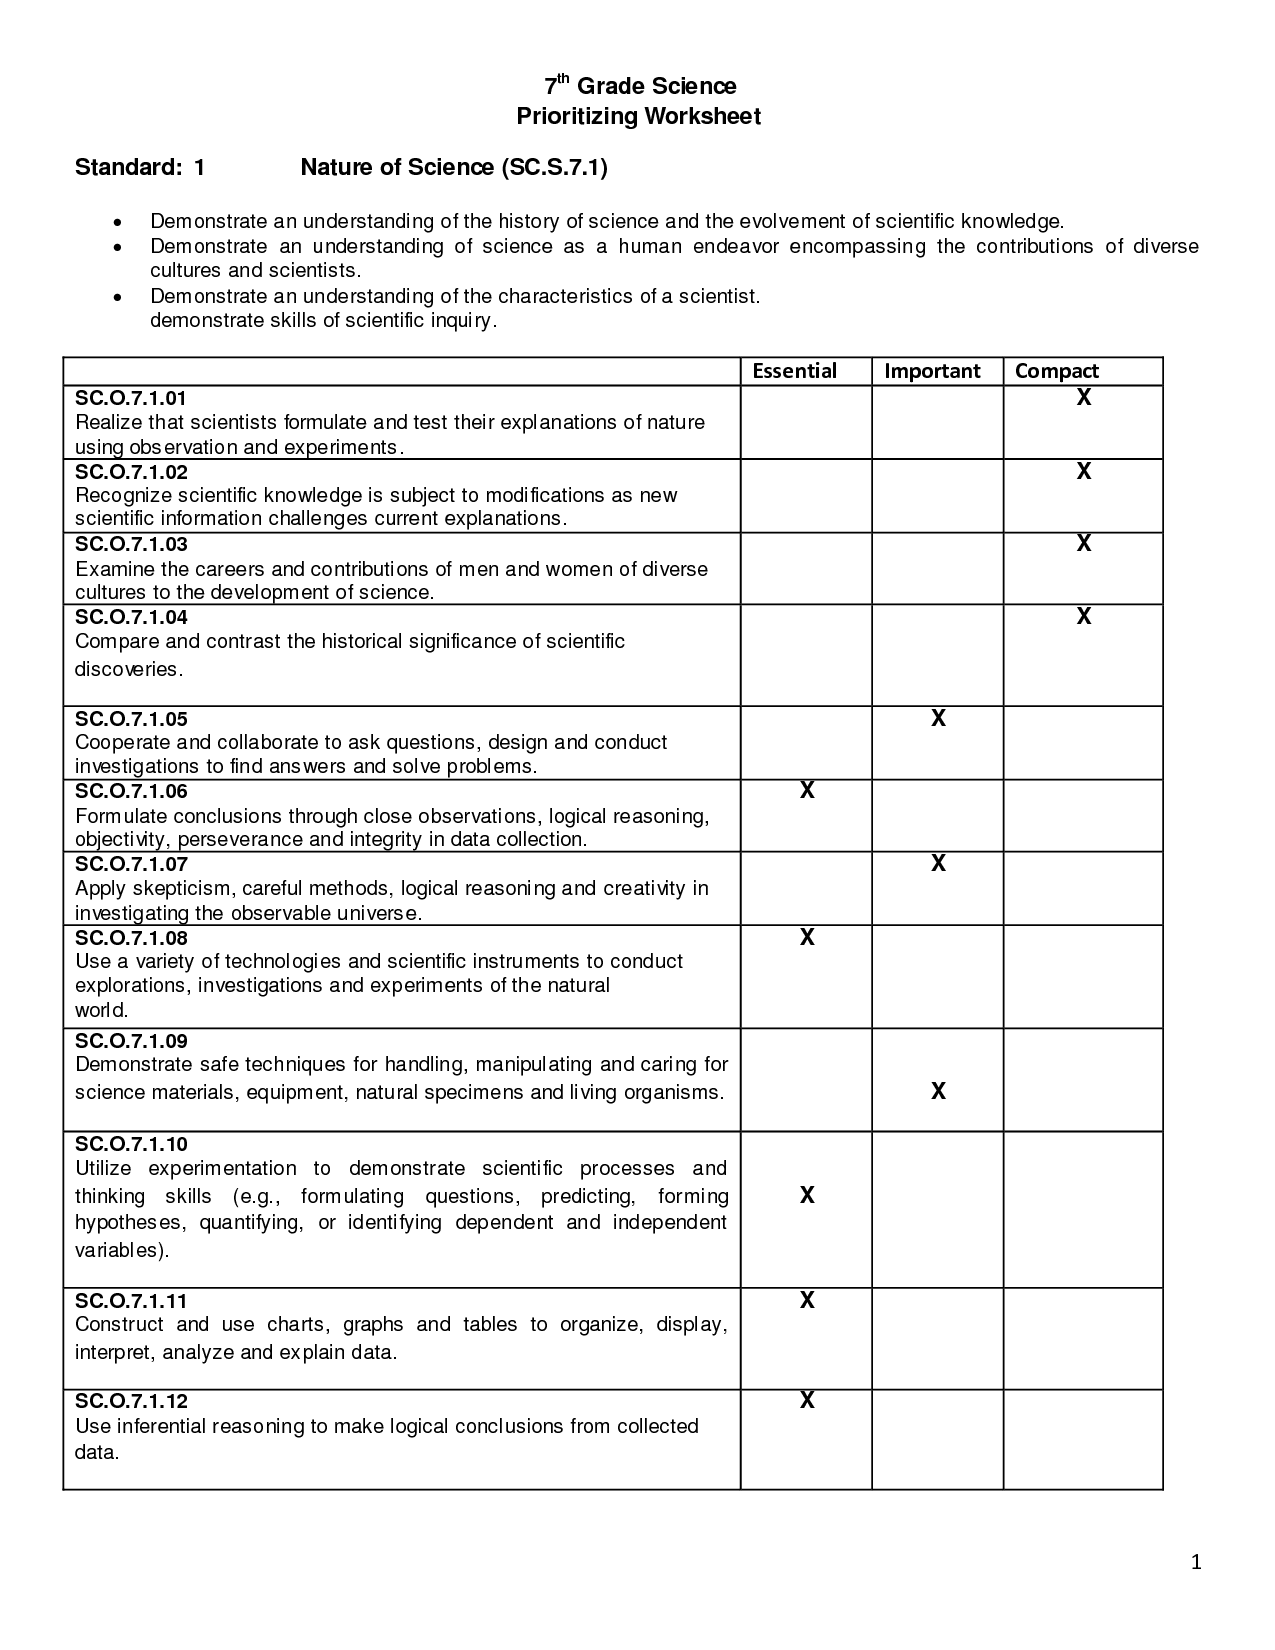 19-best-images-of-cells-worksheets-grade-7-plant-and-animal-cell